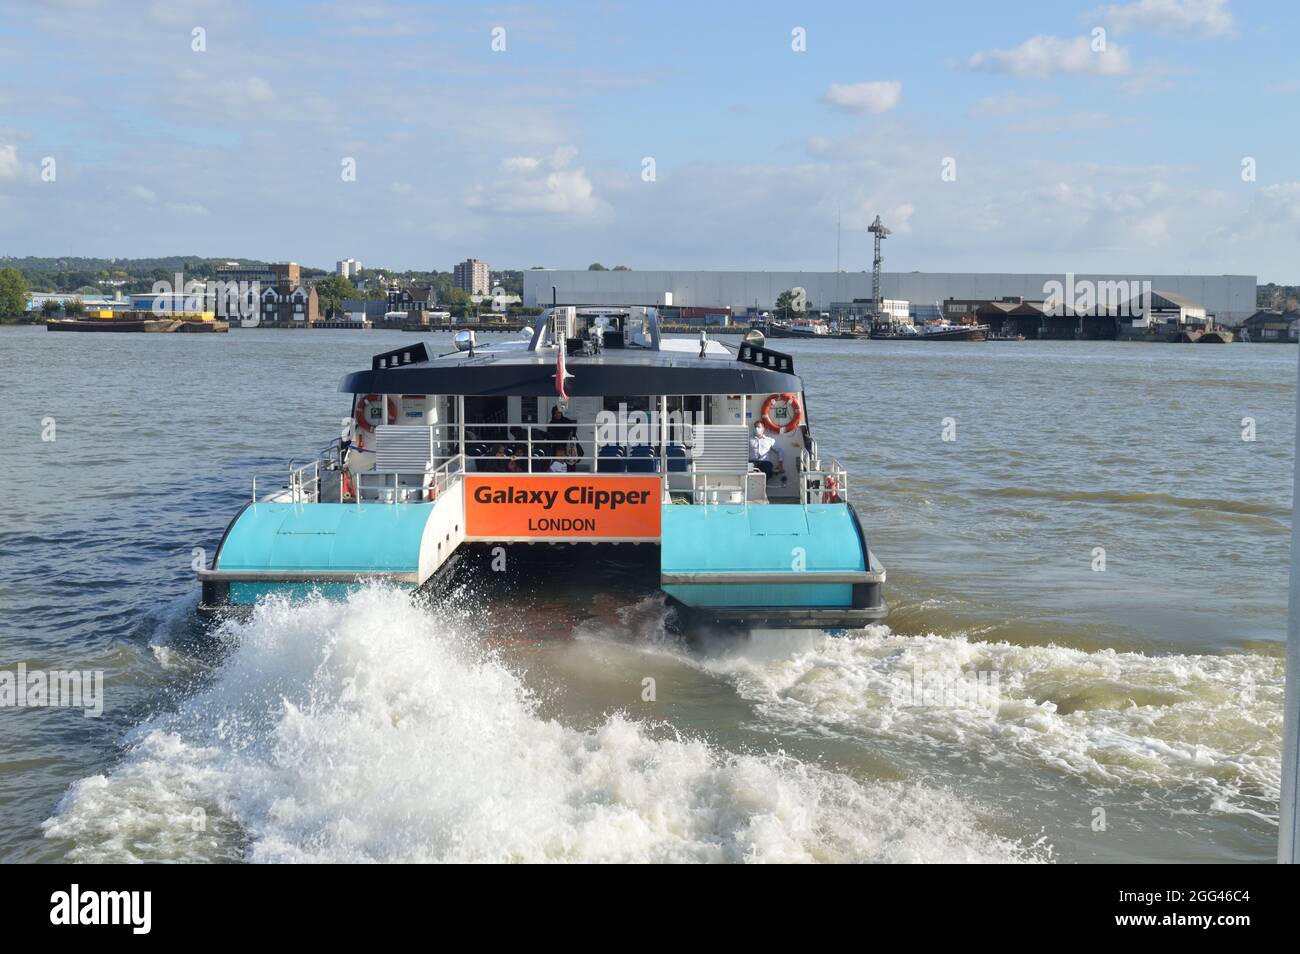 Uber Boat by Thames Clipper river bus service vessel Galaxy Clipper operating the RB1 river bus service on the River Thames in London Stock Photo